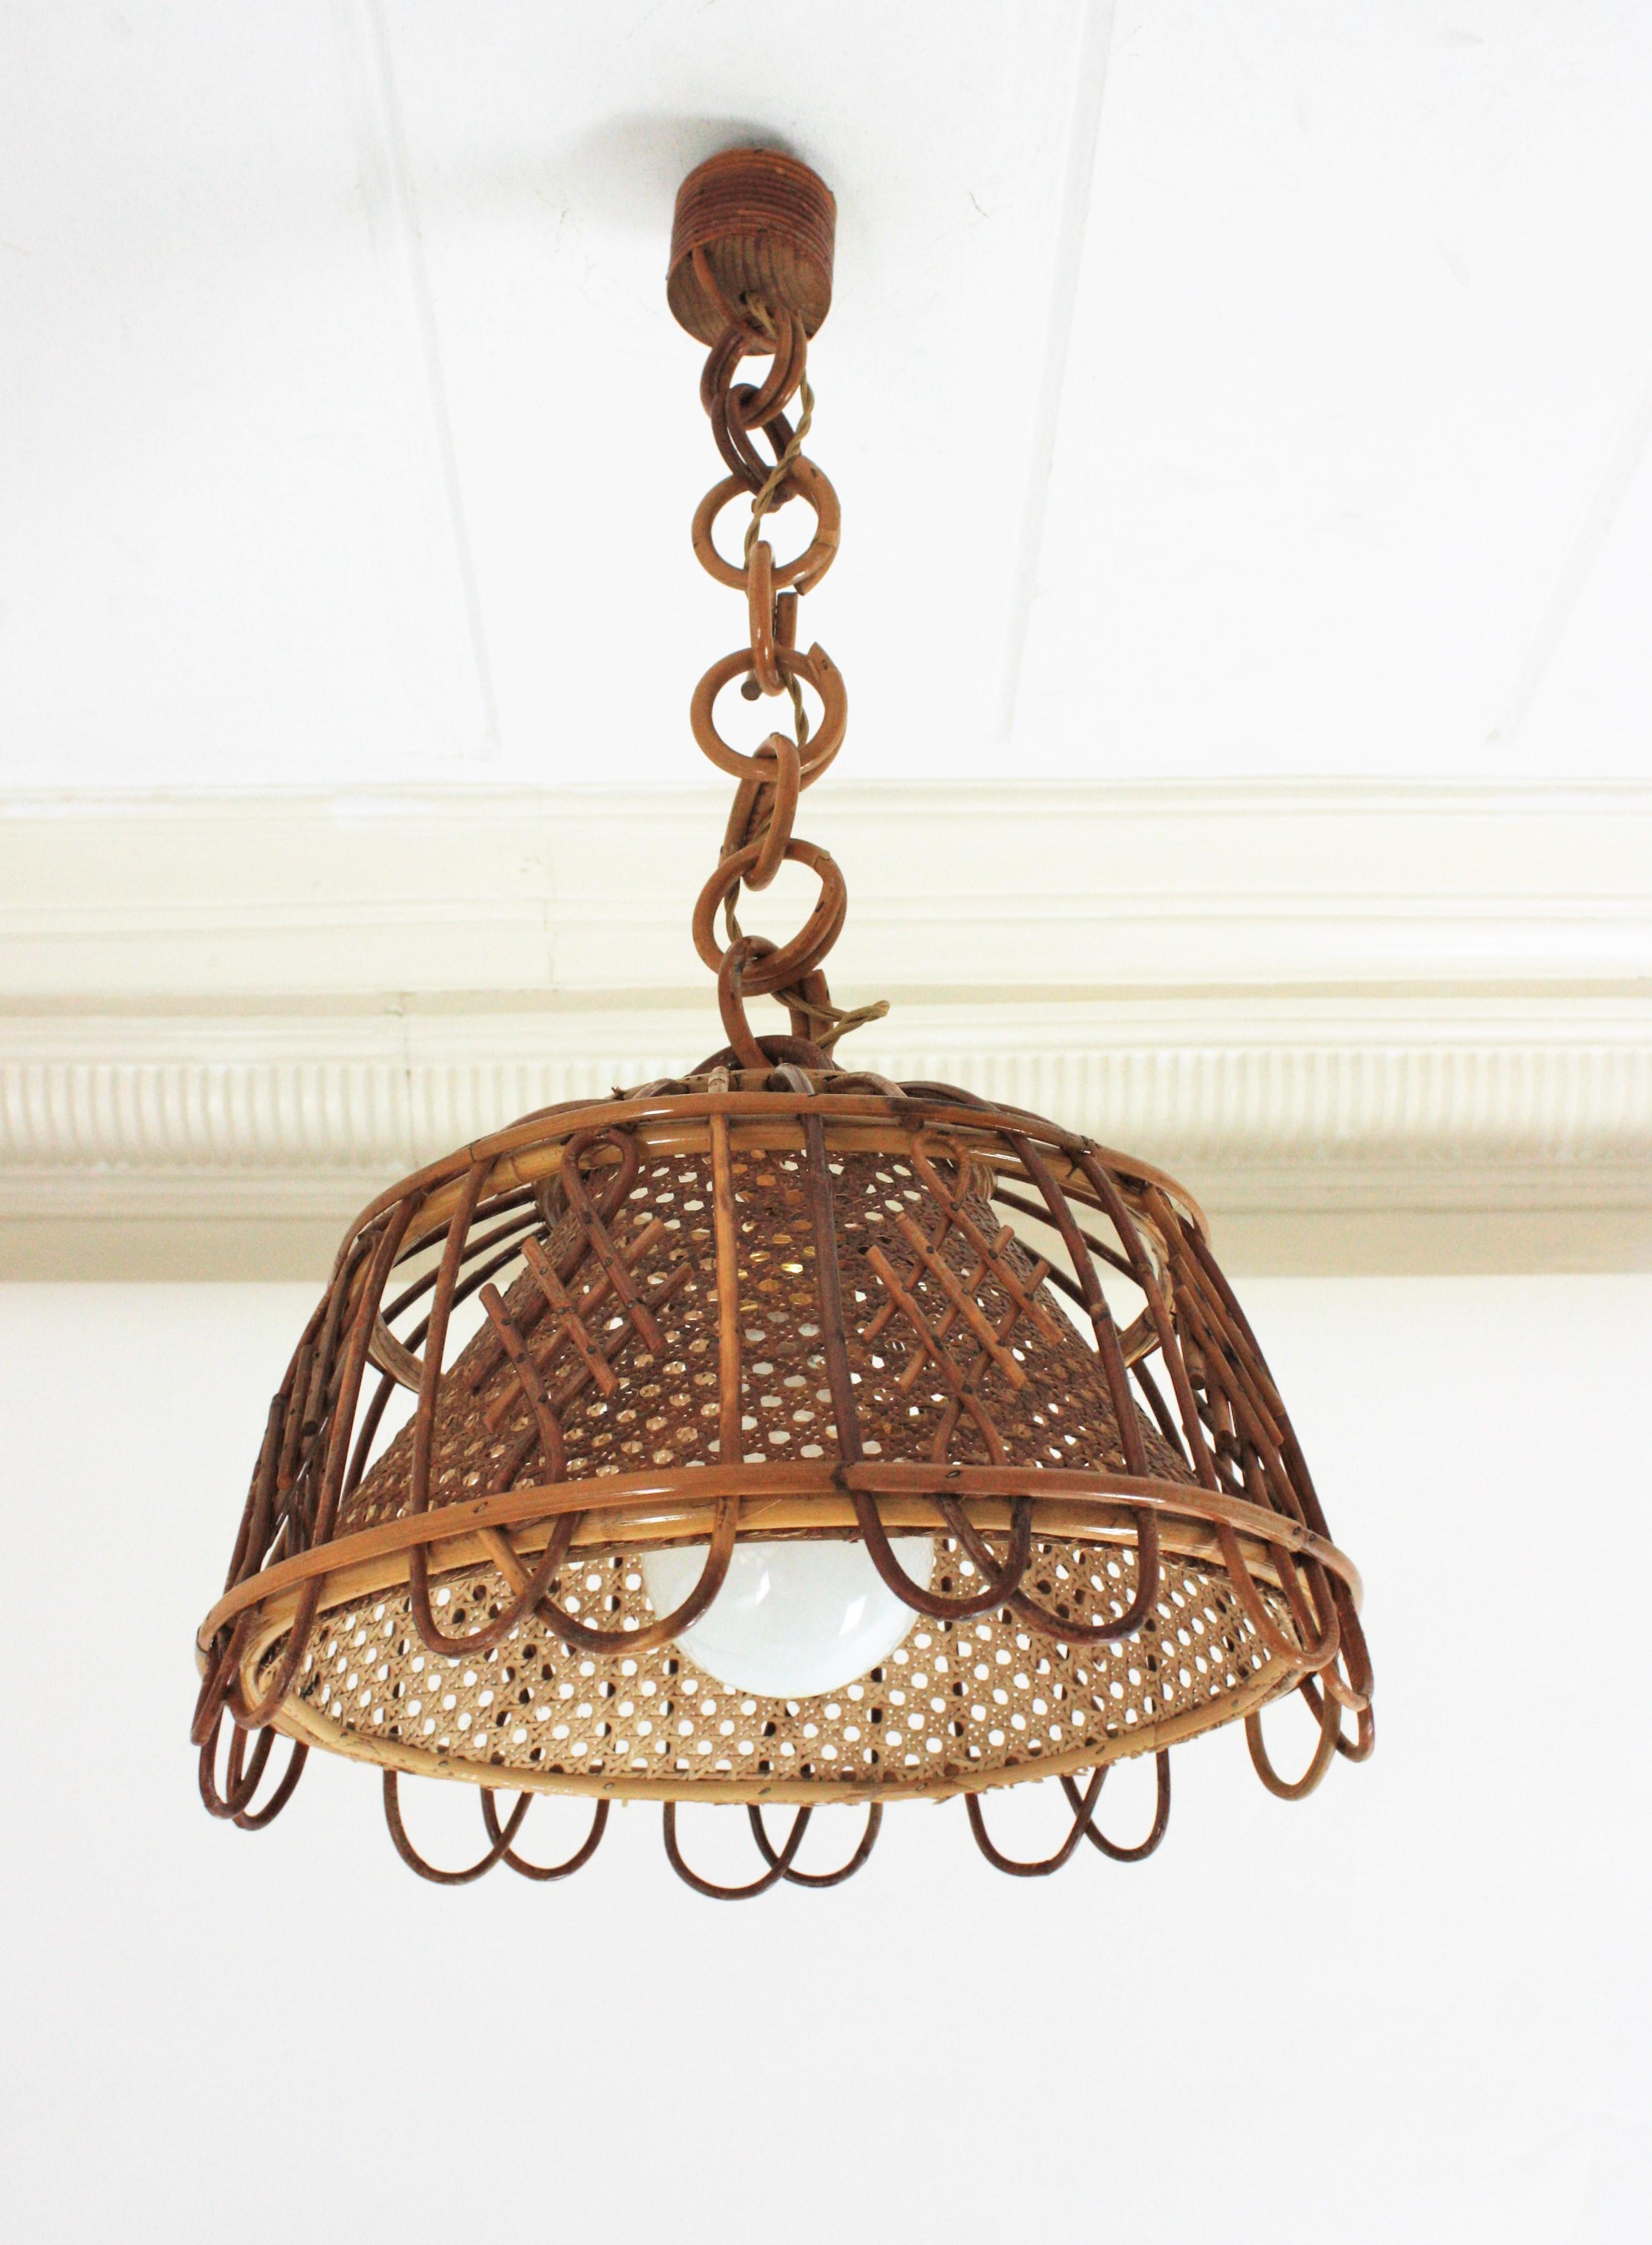 Mid-Century Modern woven wicker wire and rattan lantern or pendant ceiling lamp, Italy, 1960s. 
This cool suspension lamp features a rattan structure with vertical canes accented with chinoiserie decorations and an inner woven wicker conical